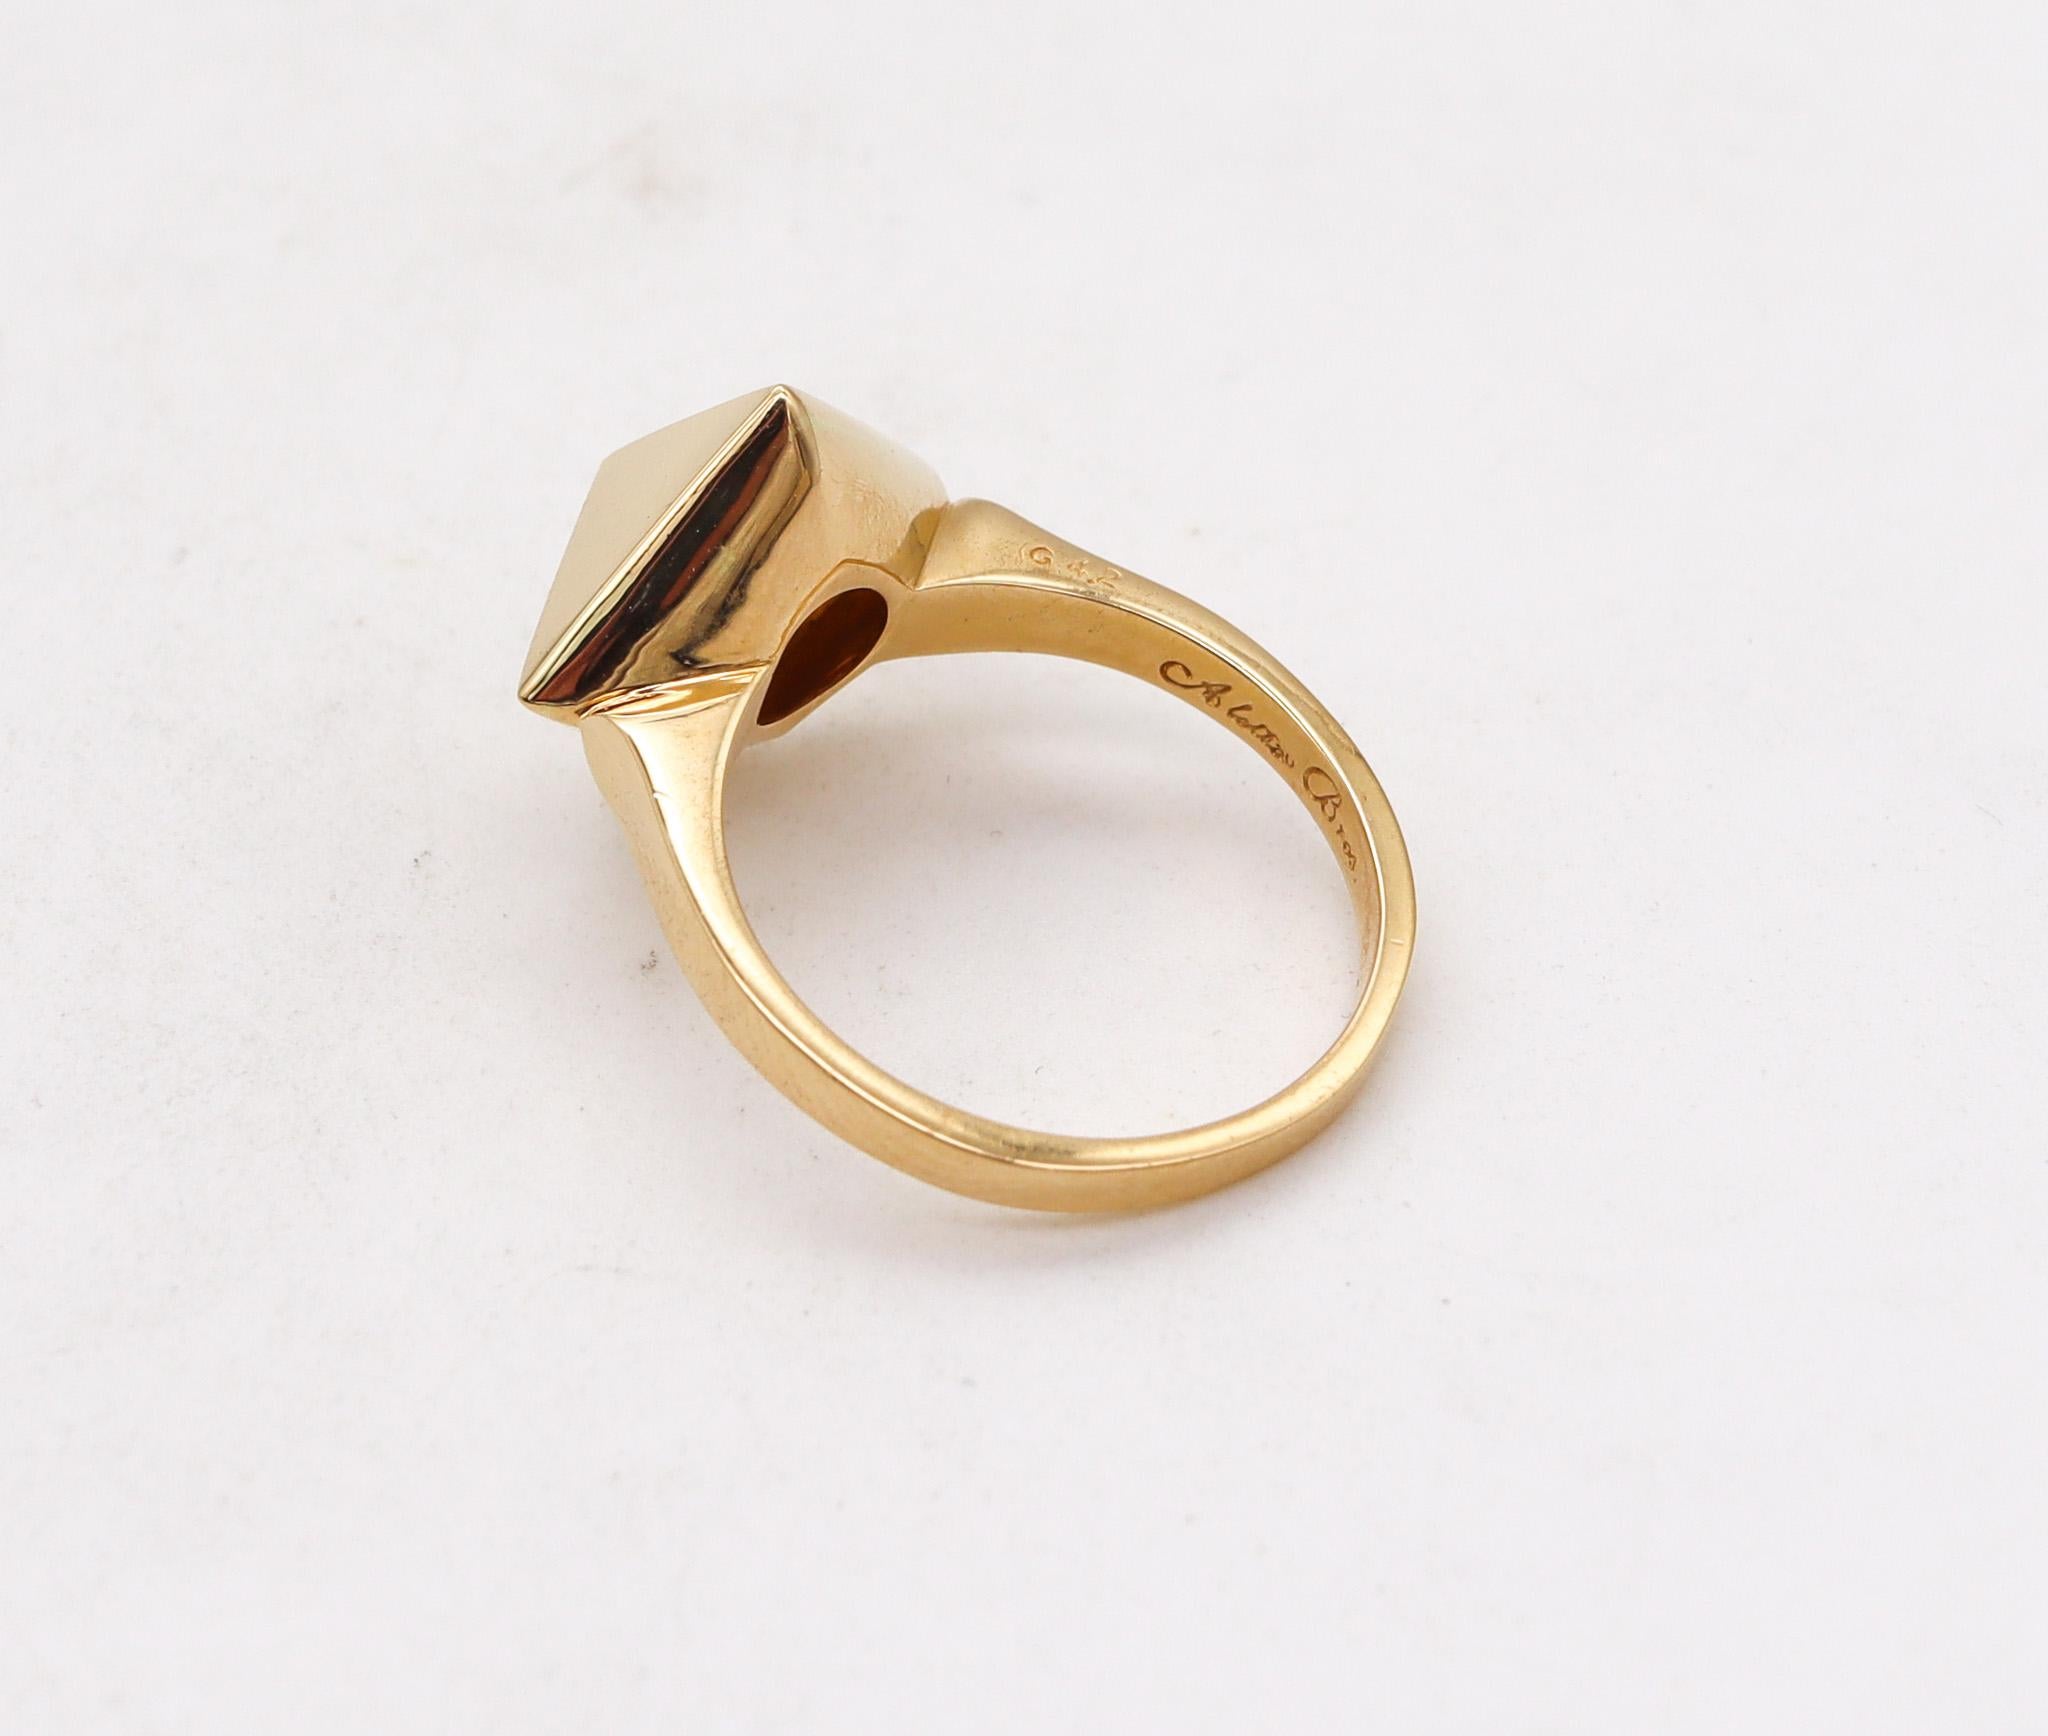 Aletto Brothers Stackable Small Triangular Geometric Ring in 18kt Yellow Gold In New Condition For Sale In Miami, FL